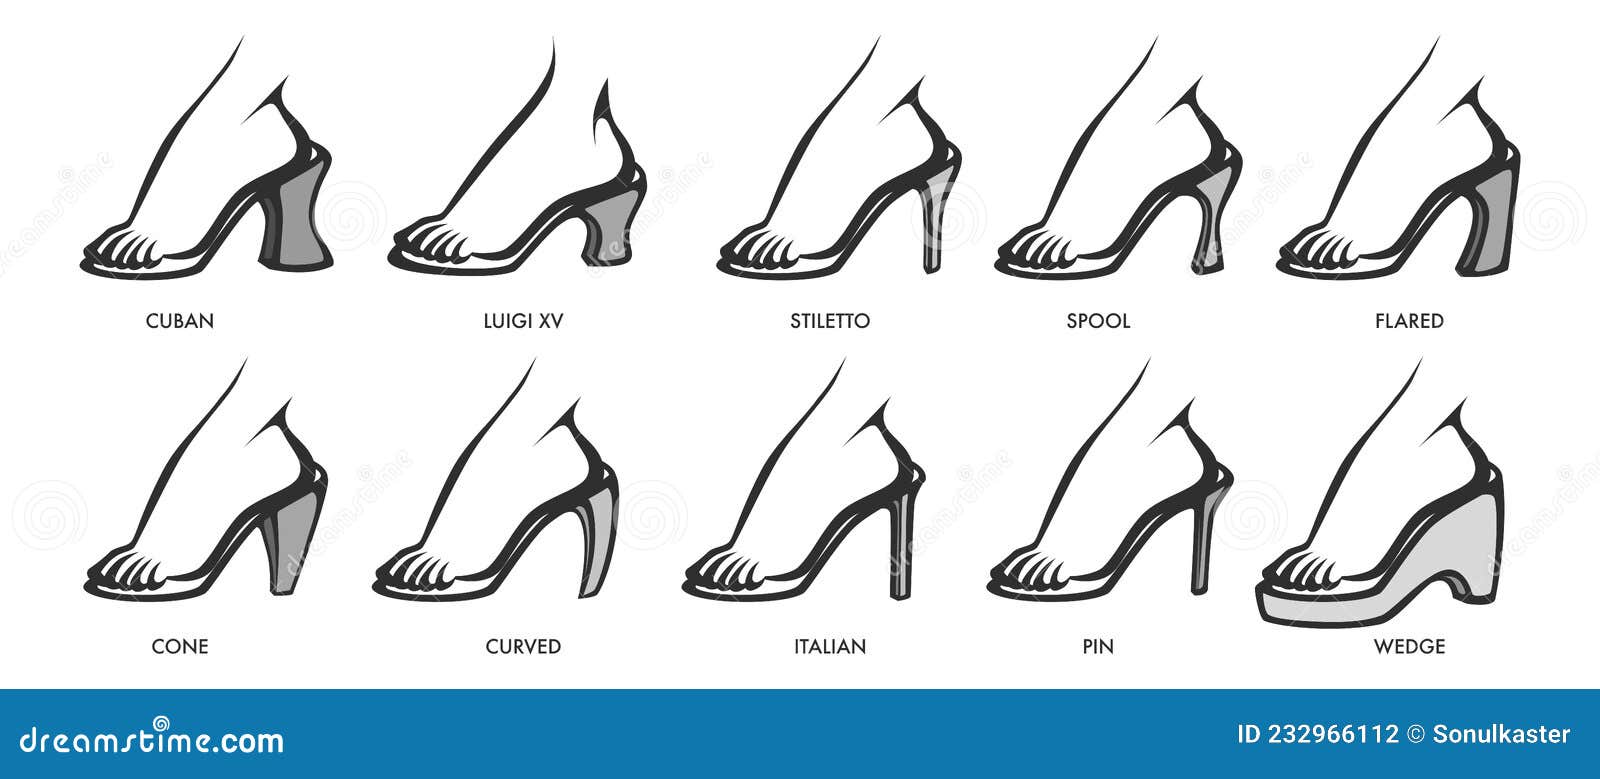 Choosing the right type of heels [Guide]